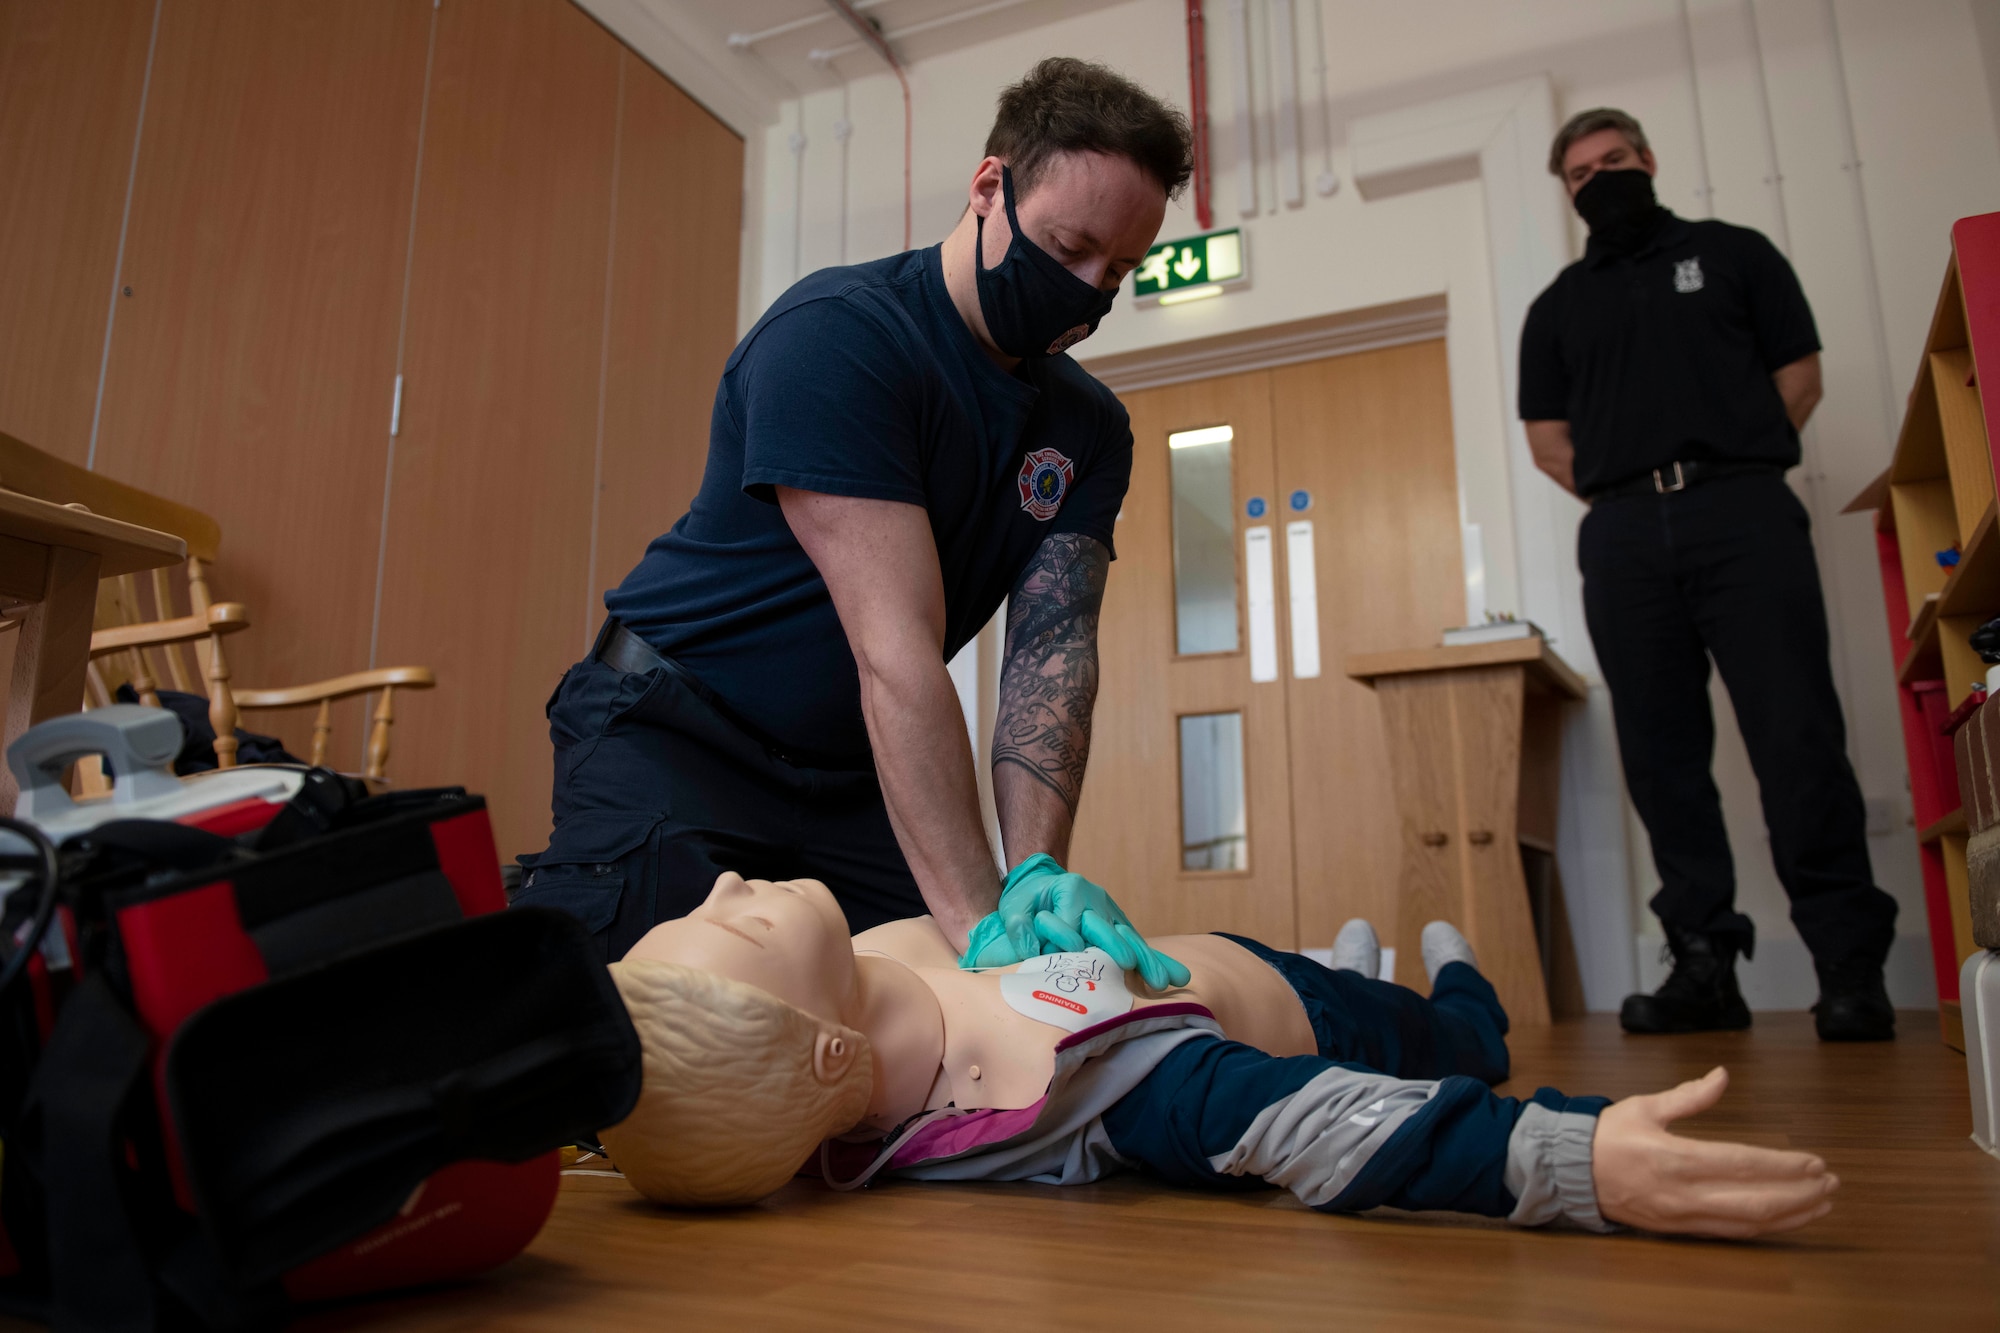 Tom Reynolds, left, 423rd Civil Engineer Squadron firefighter, conducts CPR on a simulated patient during an EMT practical application exam at Royal Air Force Croughton, England, March 31, 2021. U.K. firefighters across the 501st Combat Support Wing were tested in a practical application of their knowledge and skills, after attending over 280 hours of the U.S. National Registry of Emergency Medical Technicians course. The primary mission of the course was to prepare the fire department to respond to medical emergencies, as EMTs assume the responsibility of operating the ambulances and transporting patients to medical facilities. (U.S. Air Force photo by Senior Airman Jennifer Zima)